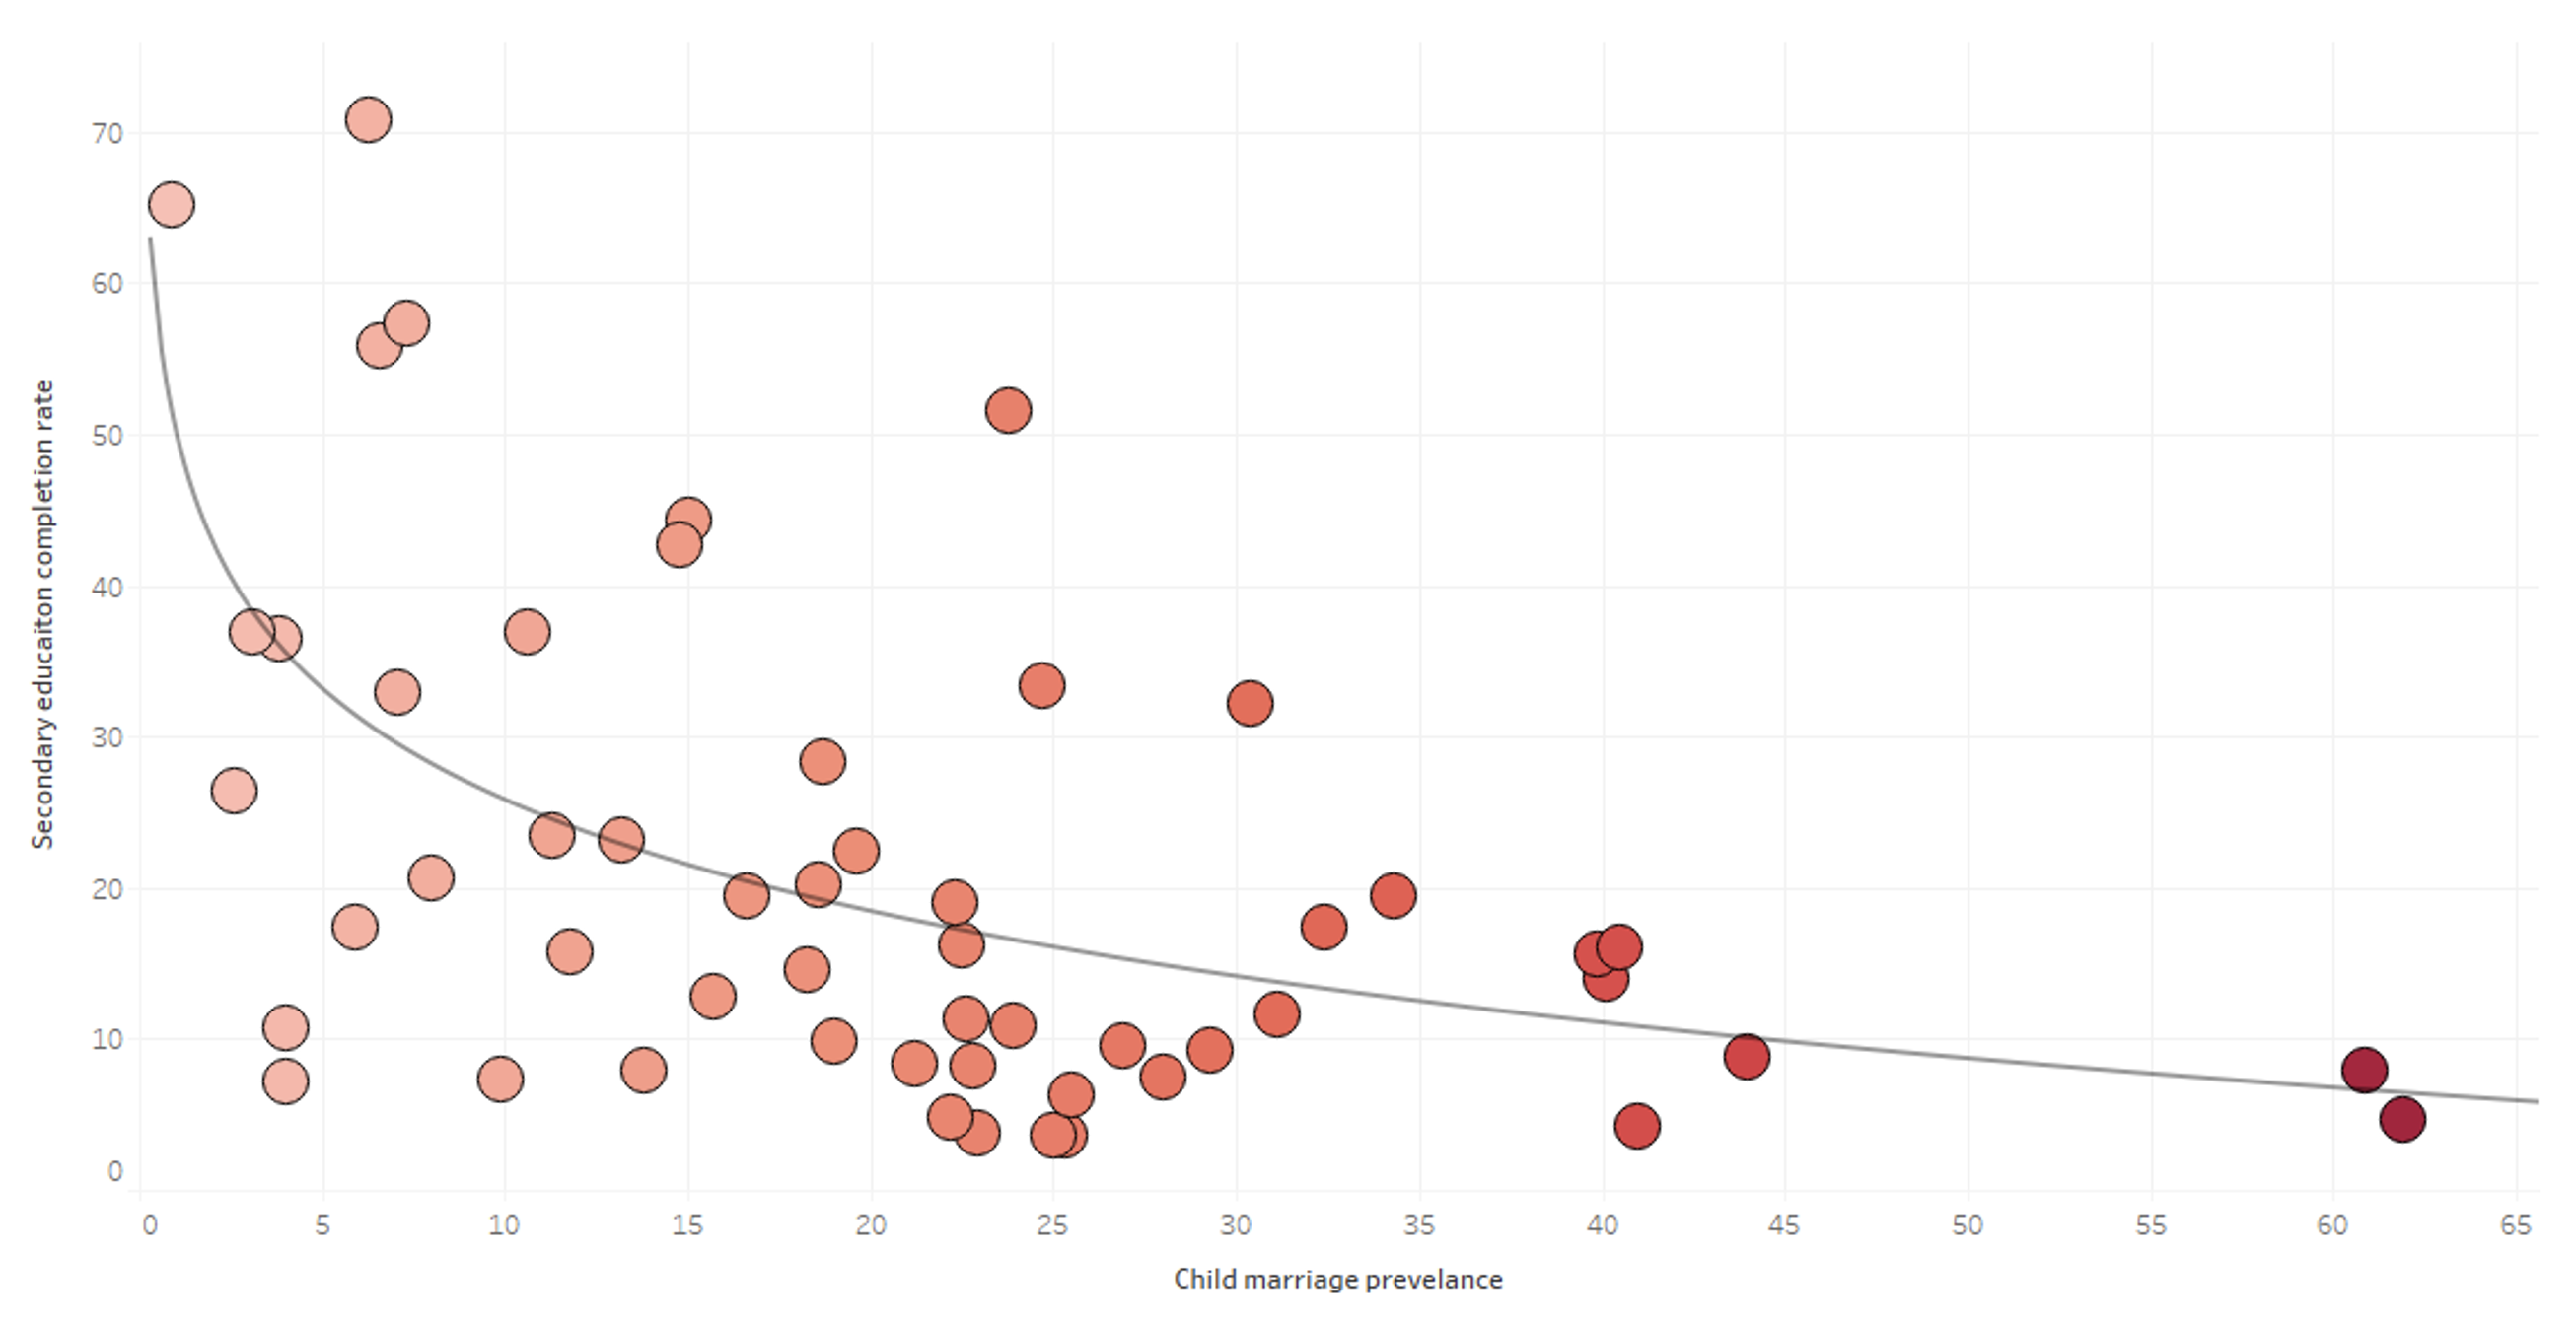 Chart 2: Correlation between child marriage and secondary education completion rate. 